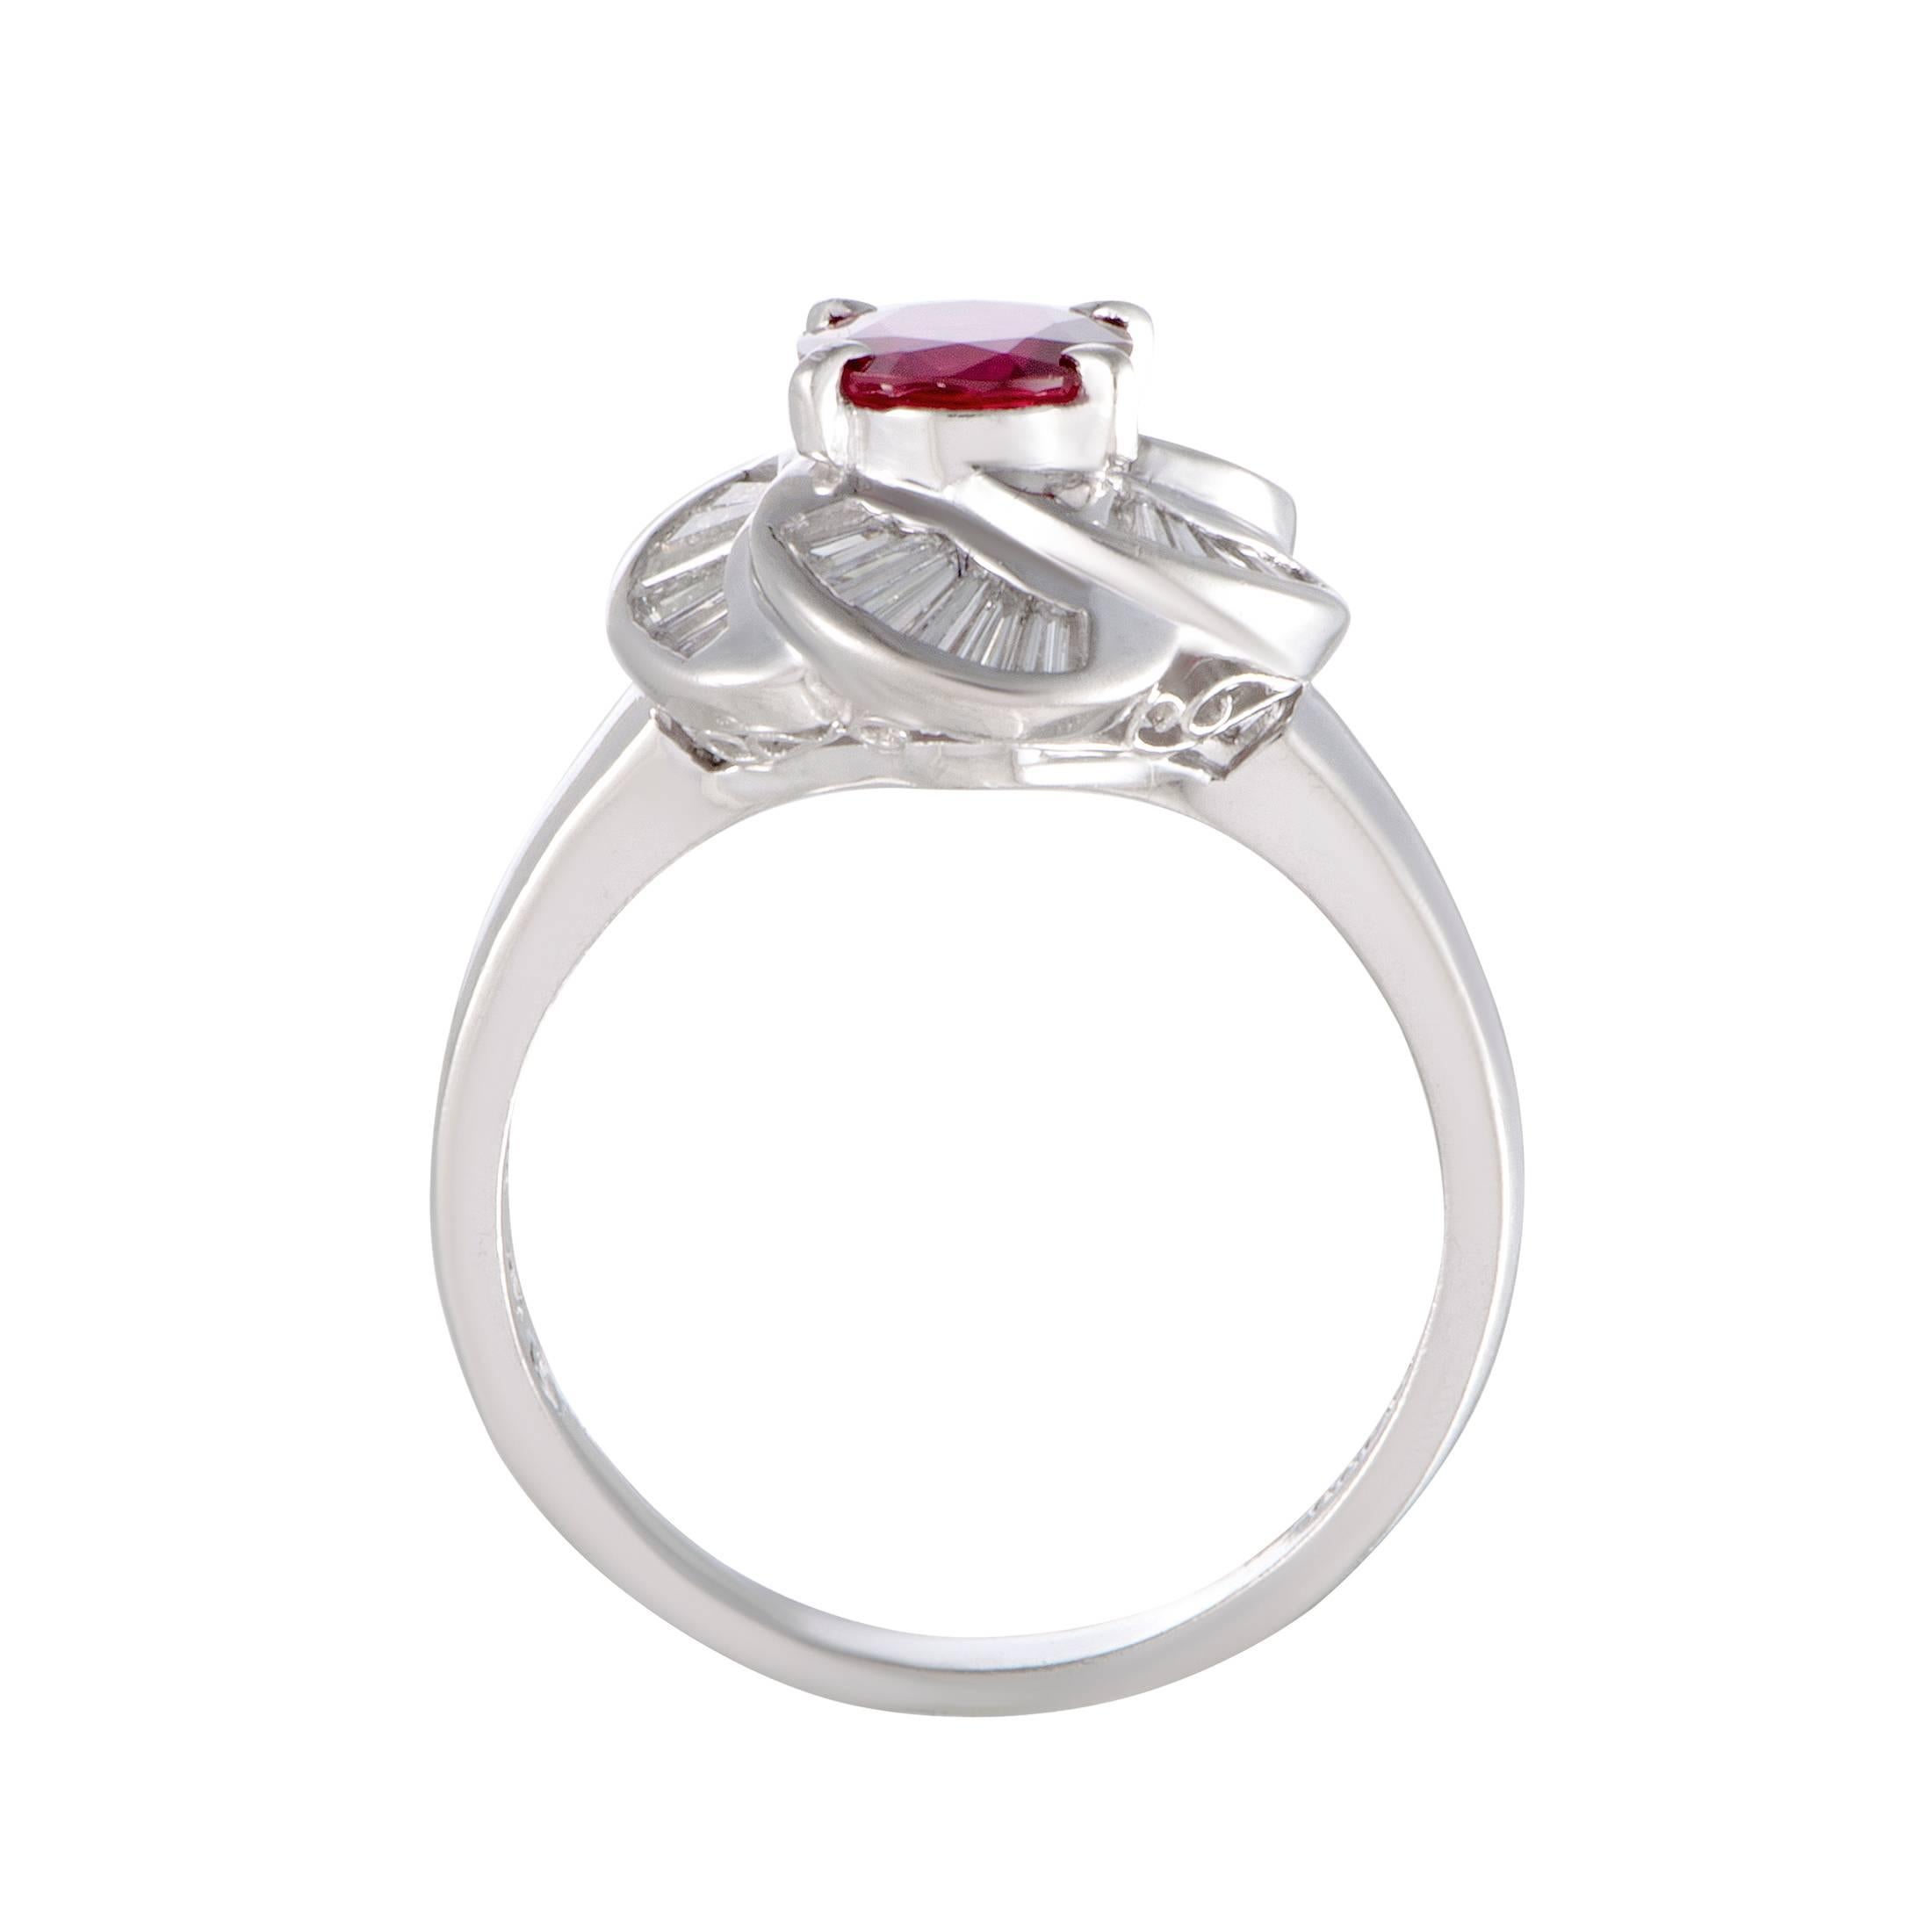 This sublime ring with its graceful design and refined décor offers an incredibly enchanting appearance. Made of elegant platinum, the beautiful ring is embellished with 0.6 carats of diamonds that surround a spectacularly gorgeous ruby weighing